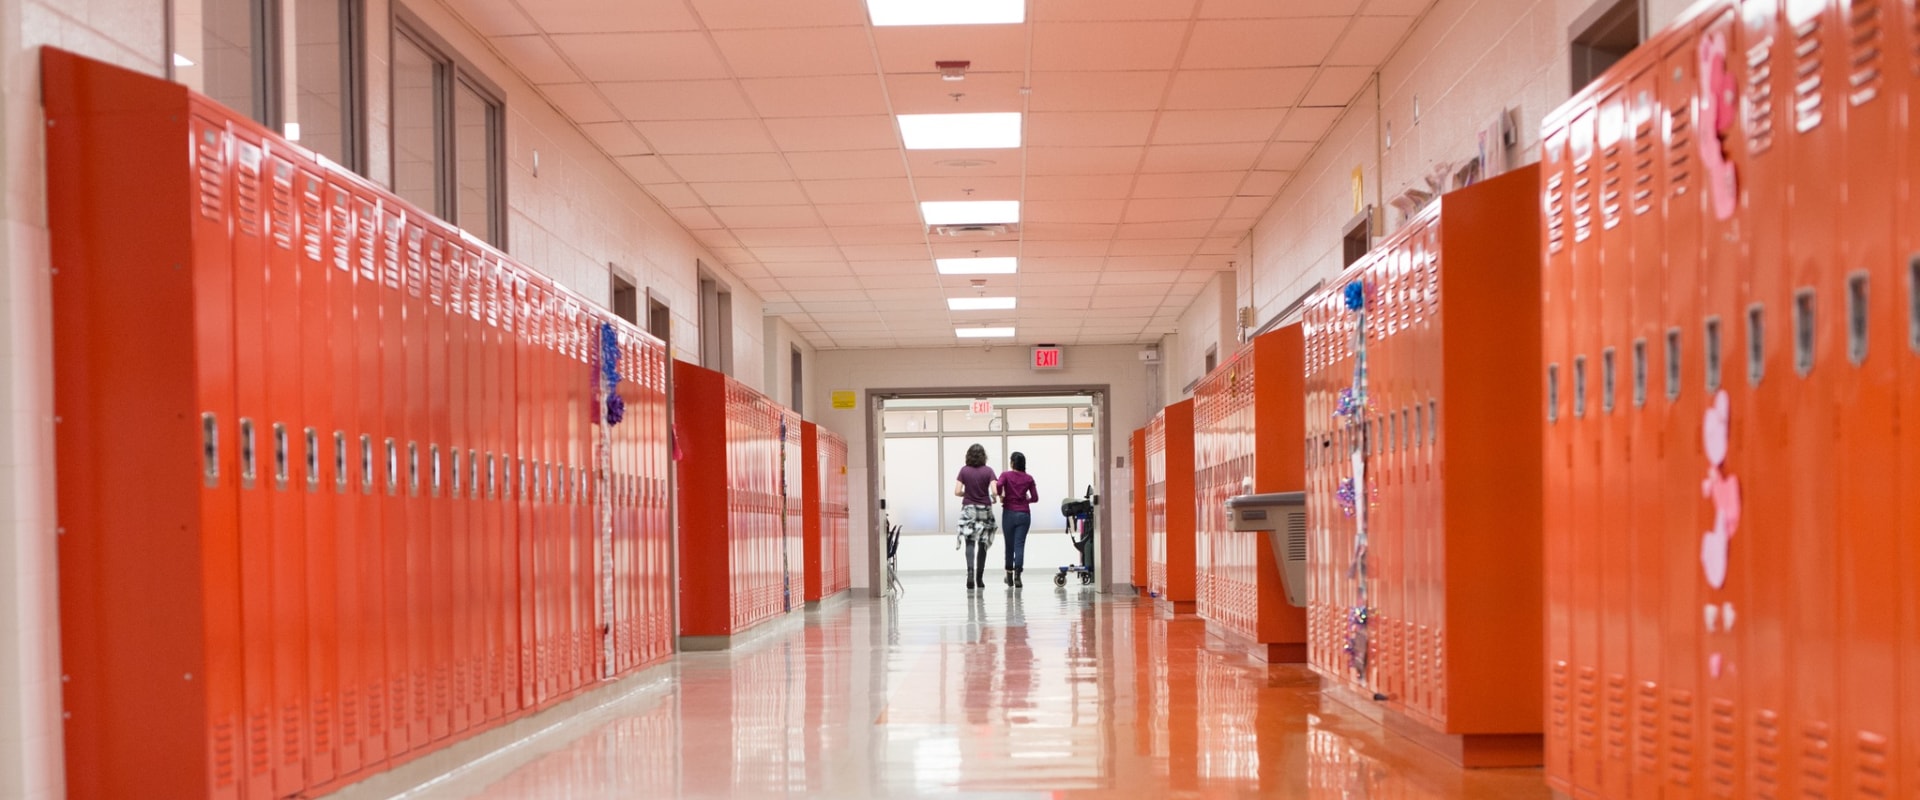 Creating a Safe and Supportive Learning Environment in Dulles, Virginia Schools